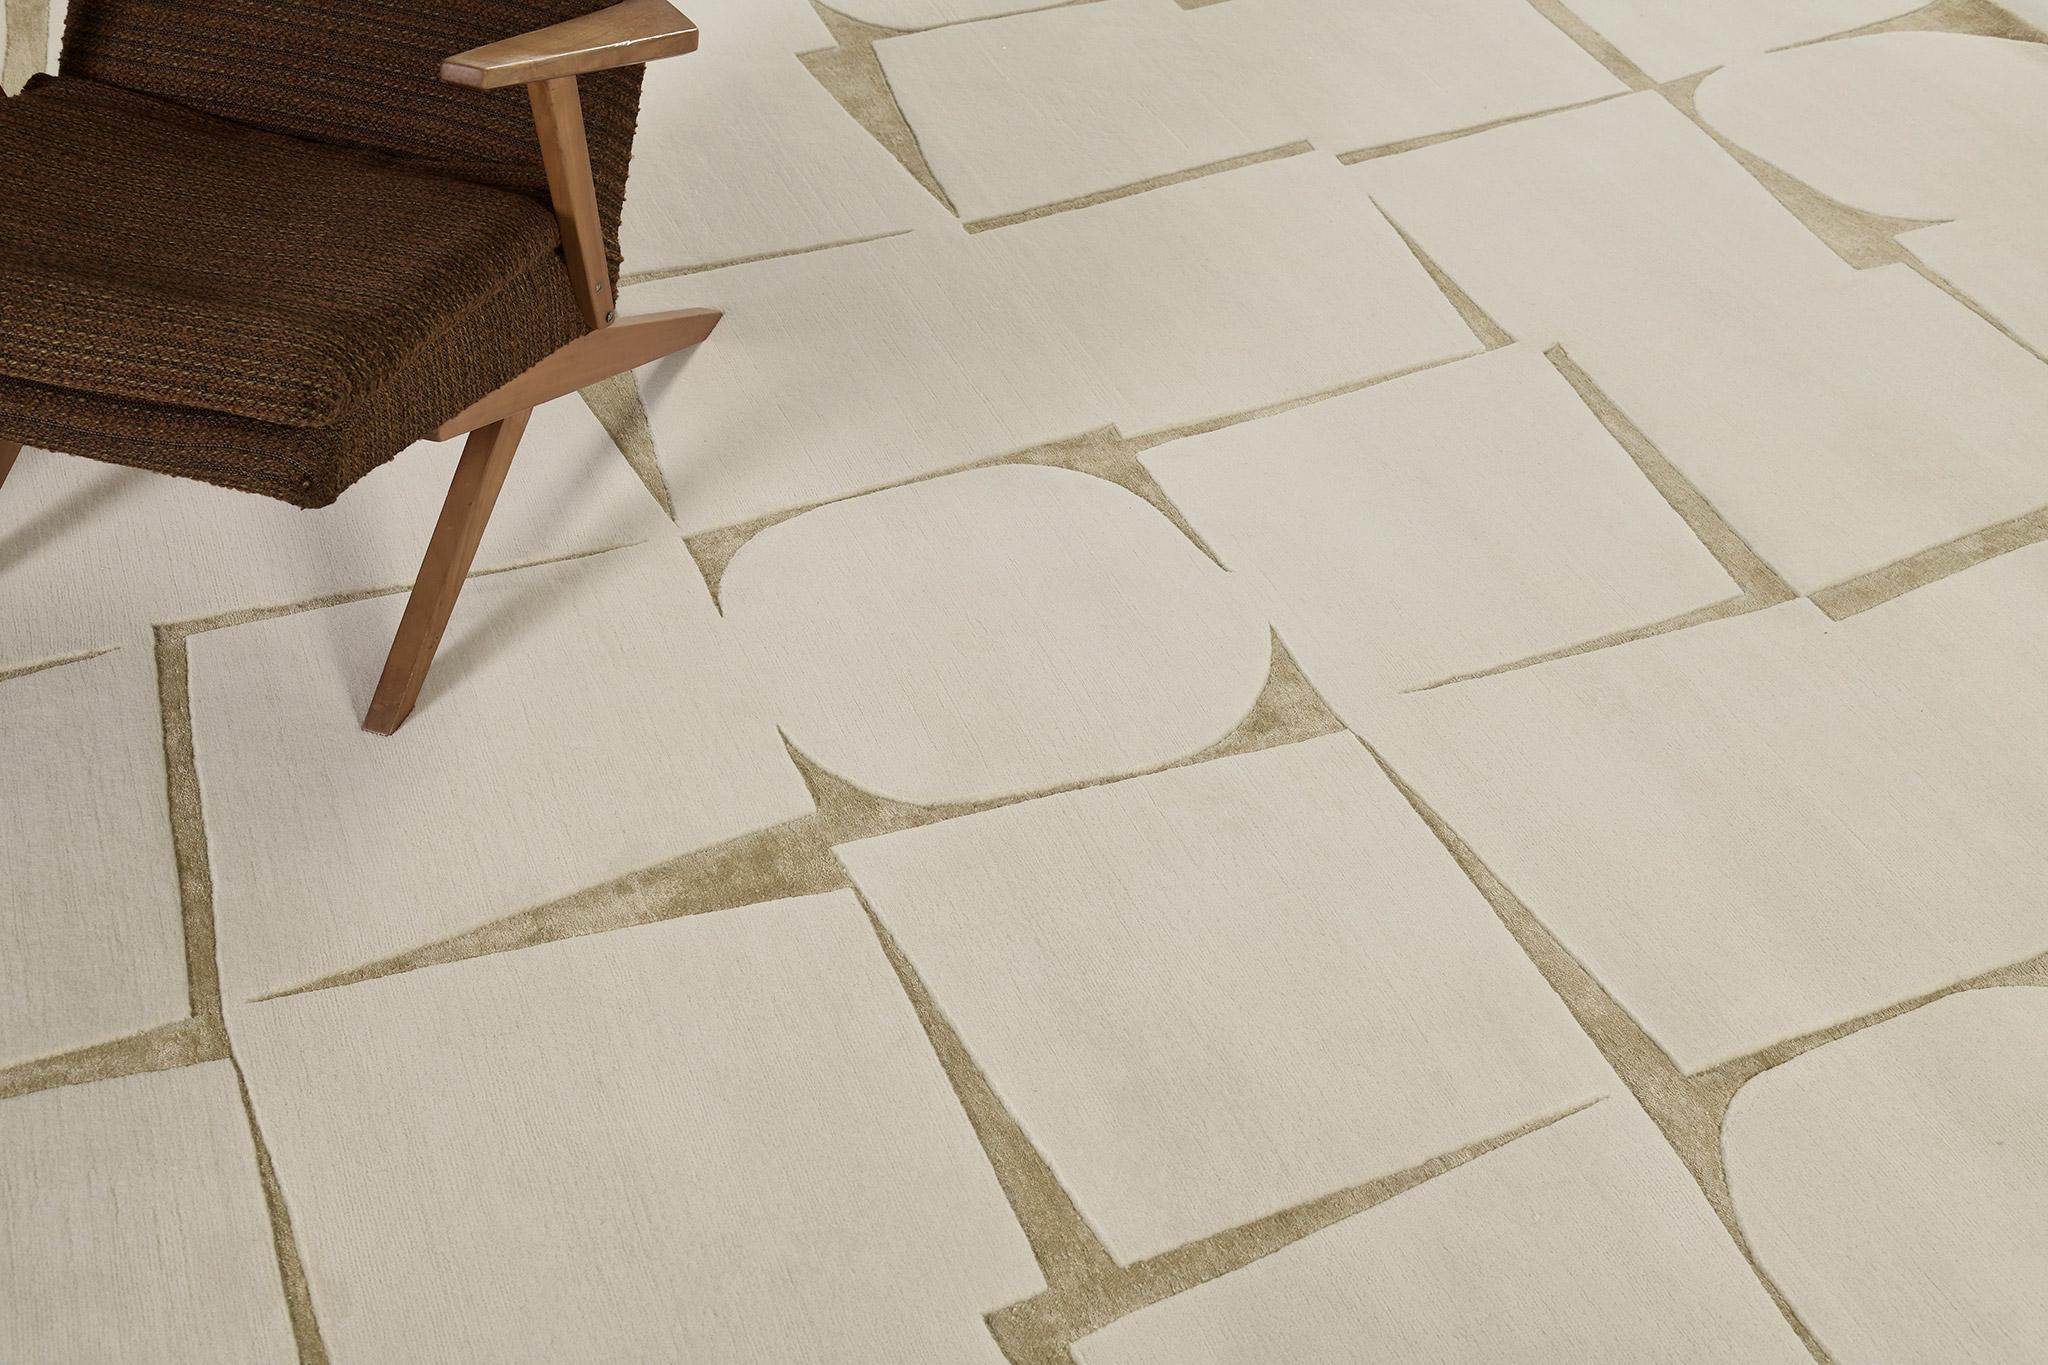 Toccato’ features stacked geometrical patterns depicting aesthetic artistry. It is a part of the Design Rhymes Collection which pulls inspiration from different aspects of architecture. This rug is rendered in the most soothing shade of ivory and